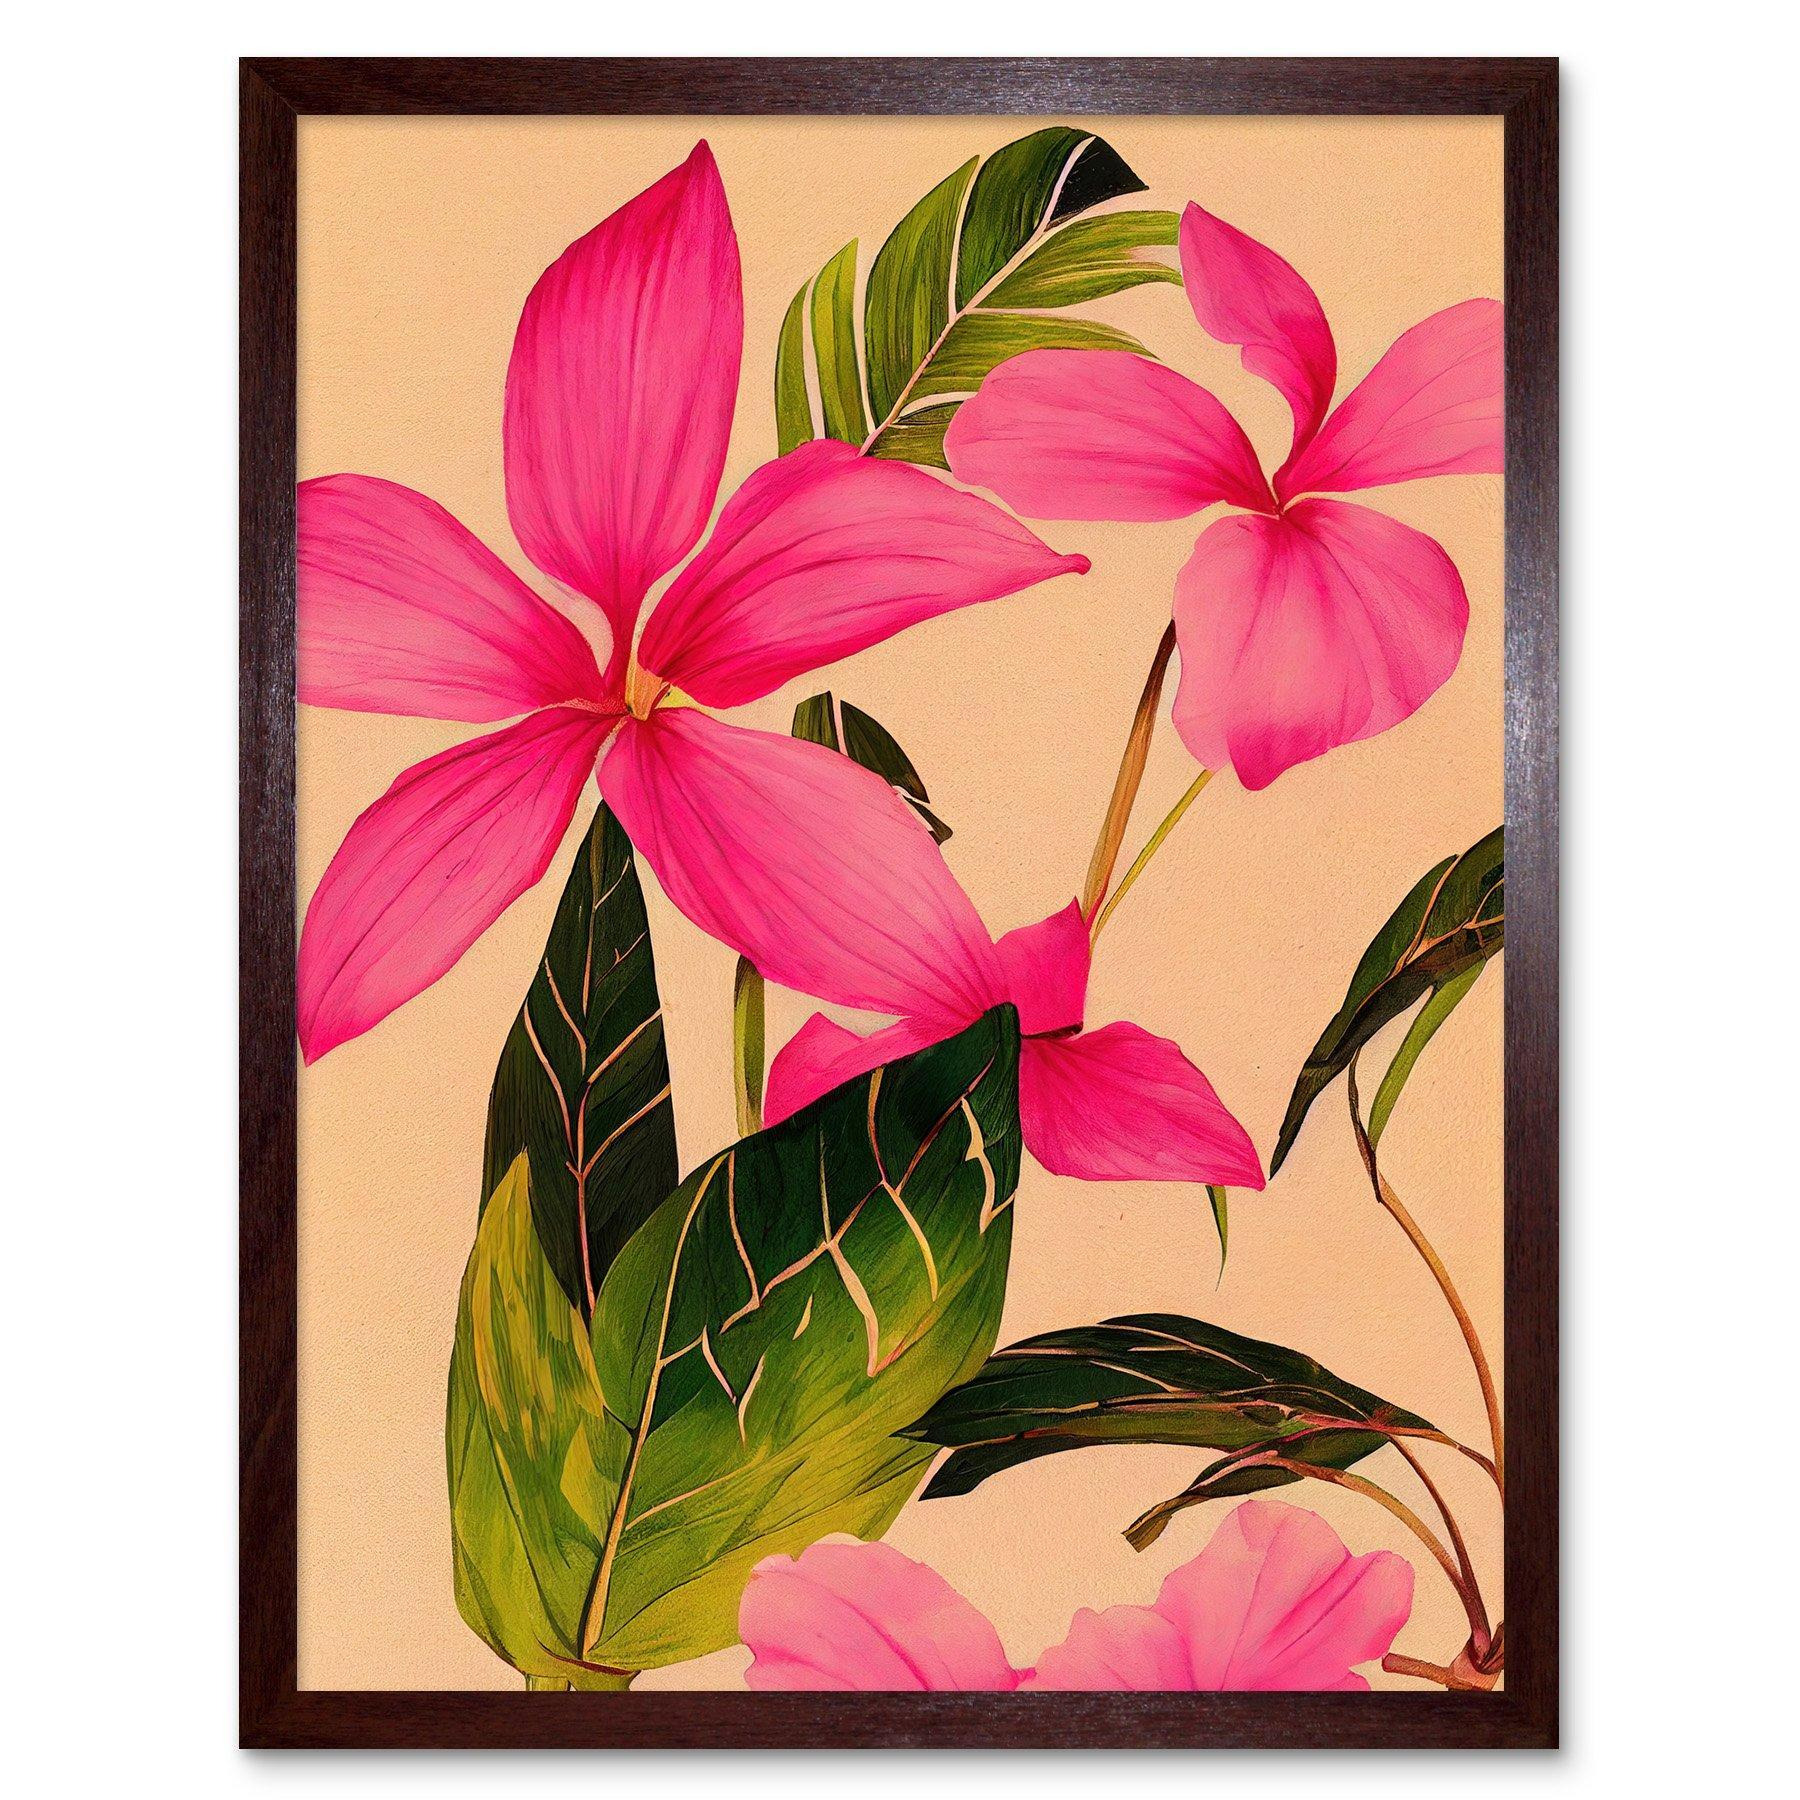 Exotic Pink Plumeria Flower Plant Blooms Watercolour Pencil Illustration Art Print Framed Poster Wall Decor 12x16 inch - image 1